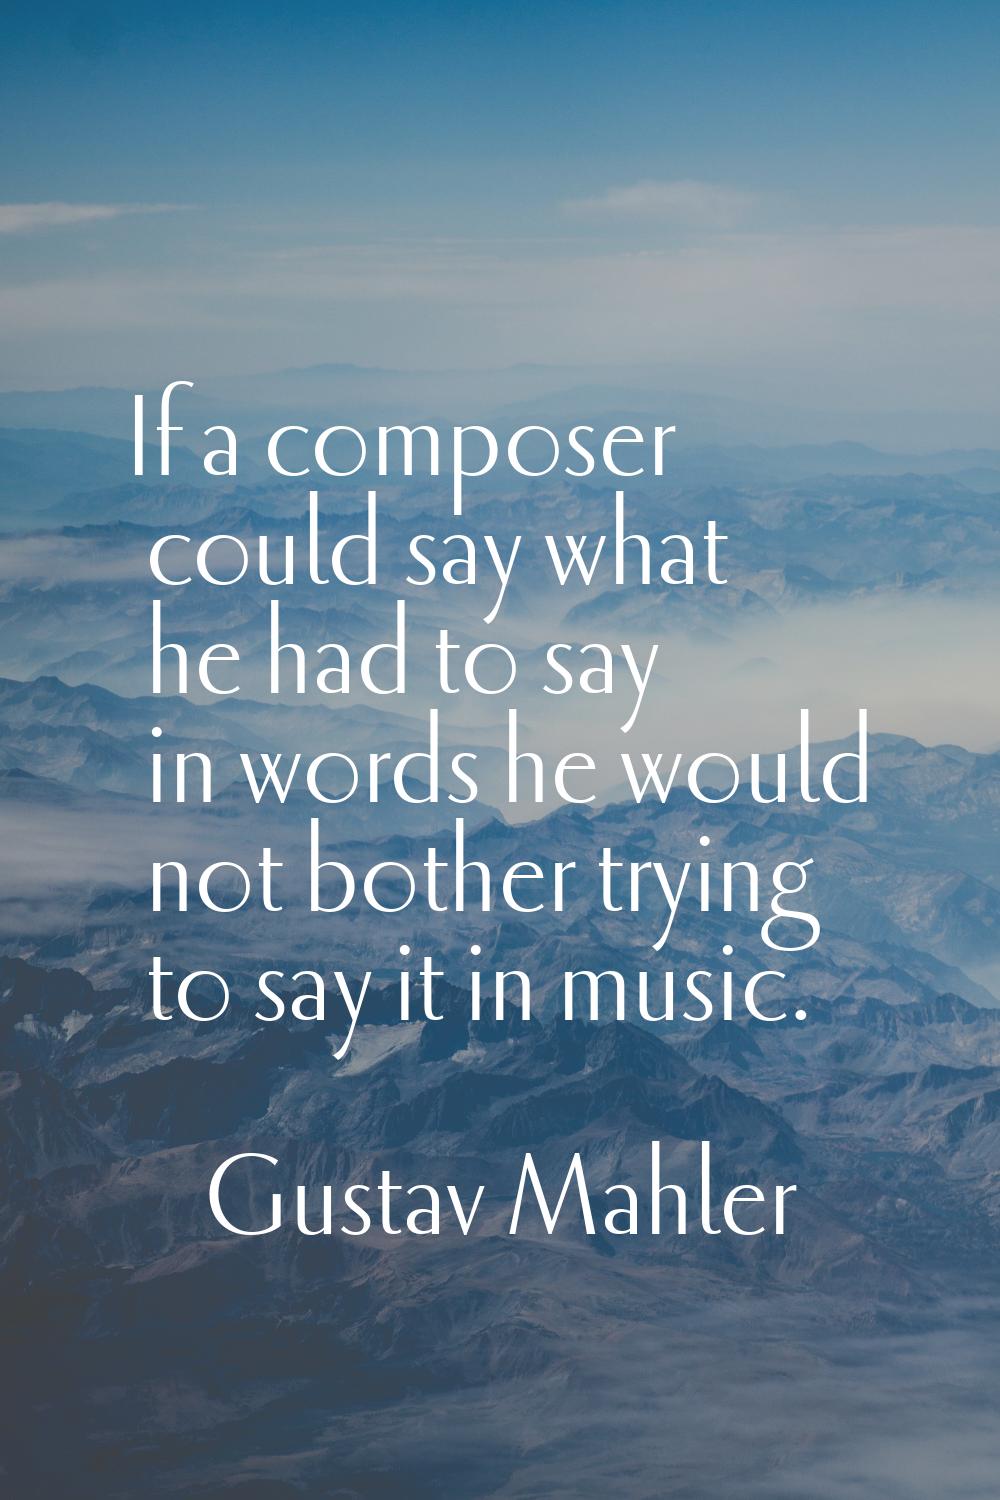 If a composer could say what he had to say in words he would not bother trying to say it in music.